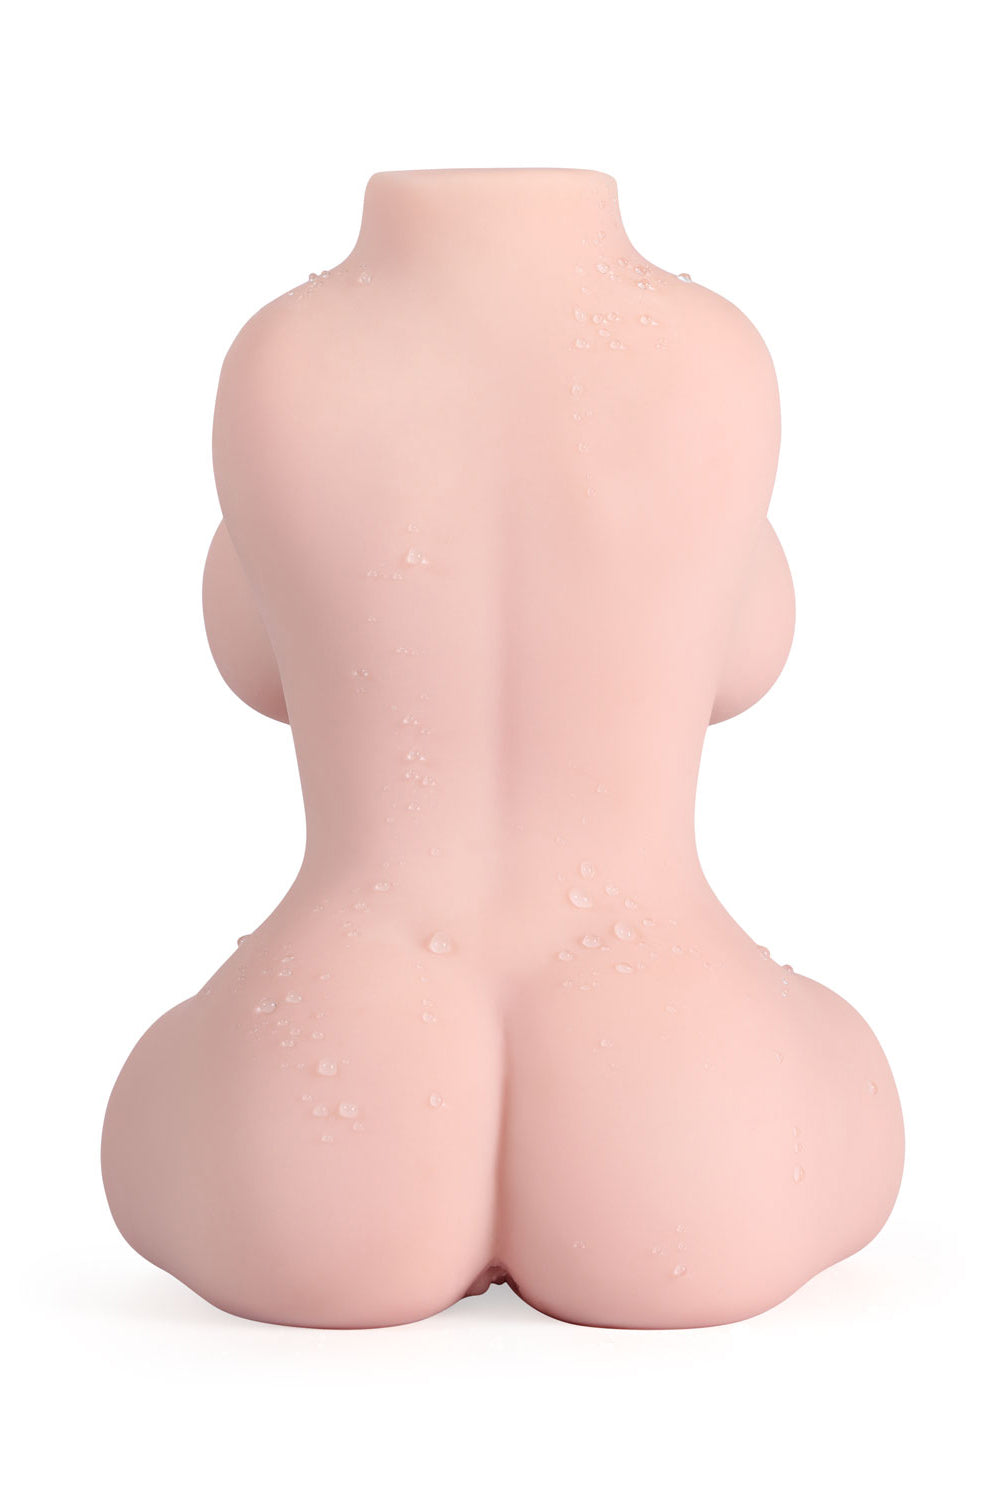 US Stock - 5.5 lbs Lovely TPE Torso Sex Doll Realistic Half Body Adult Love Doll Sex Torso For Man